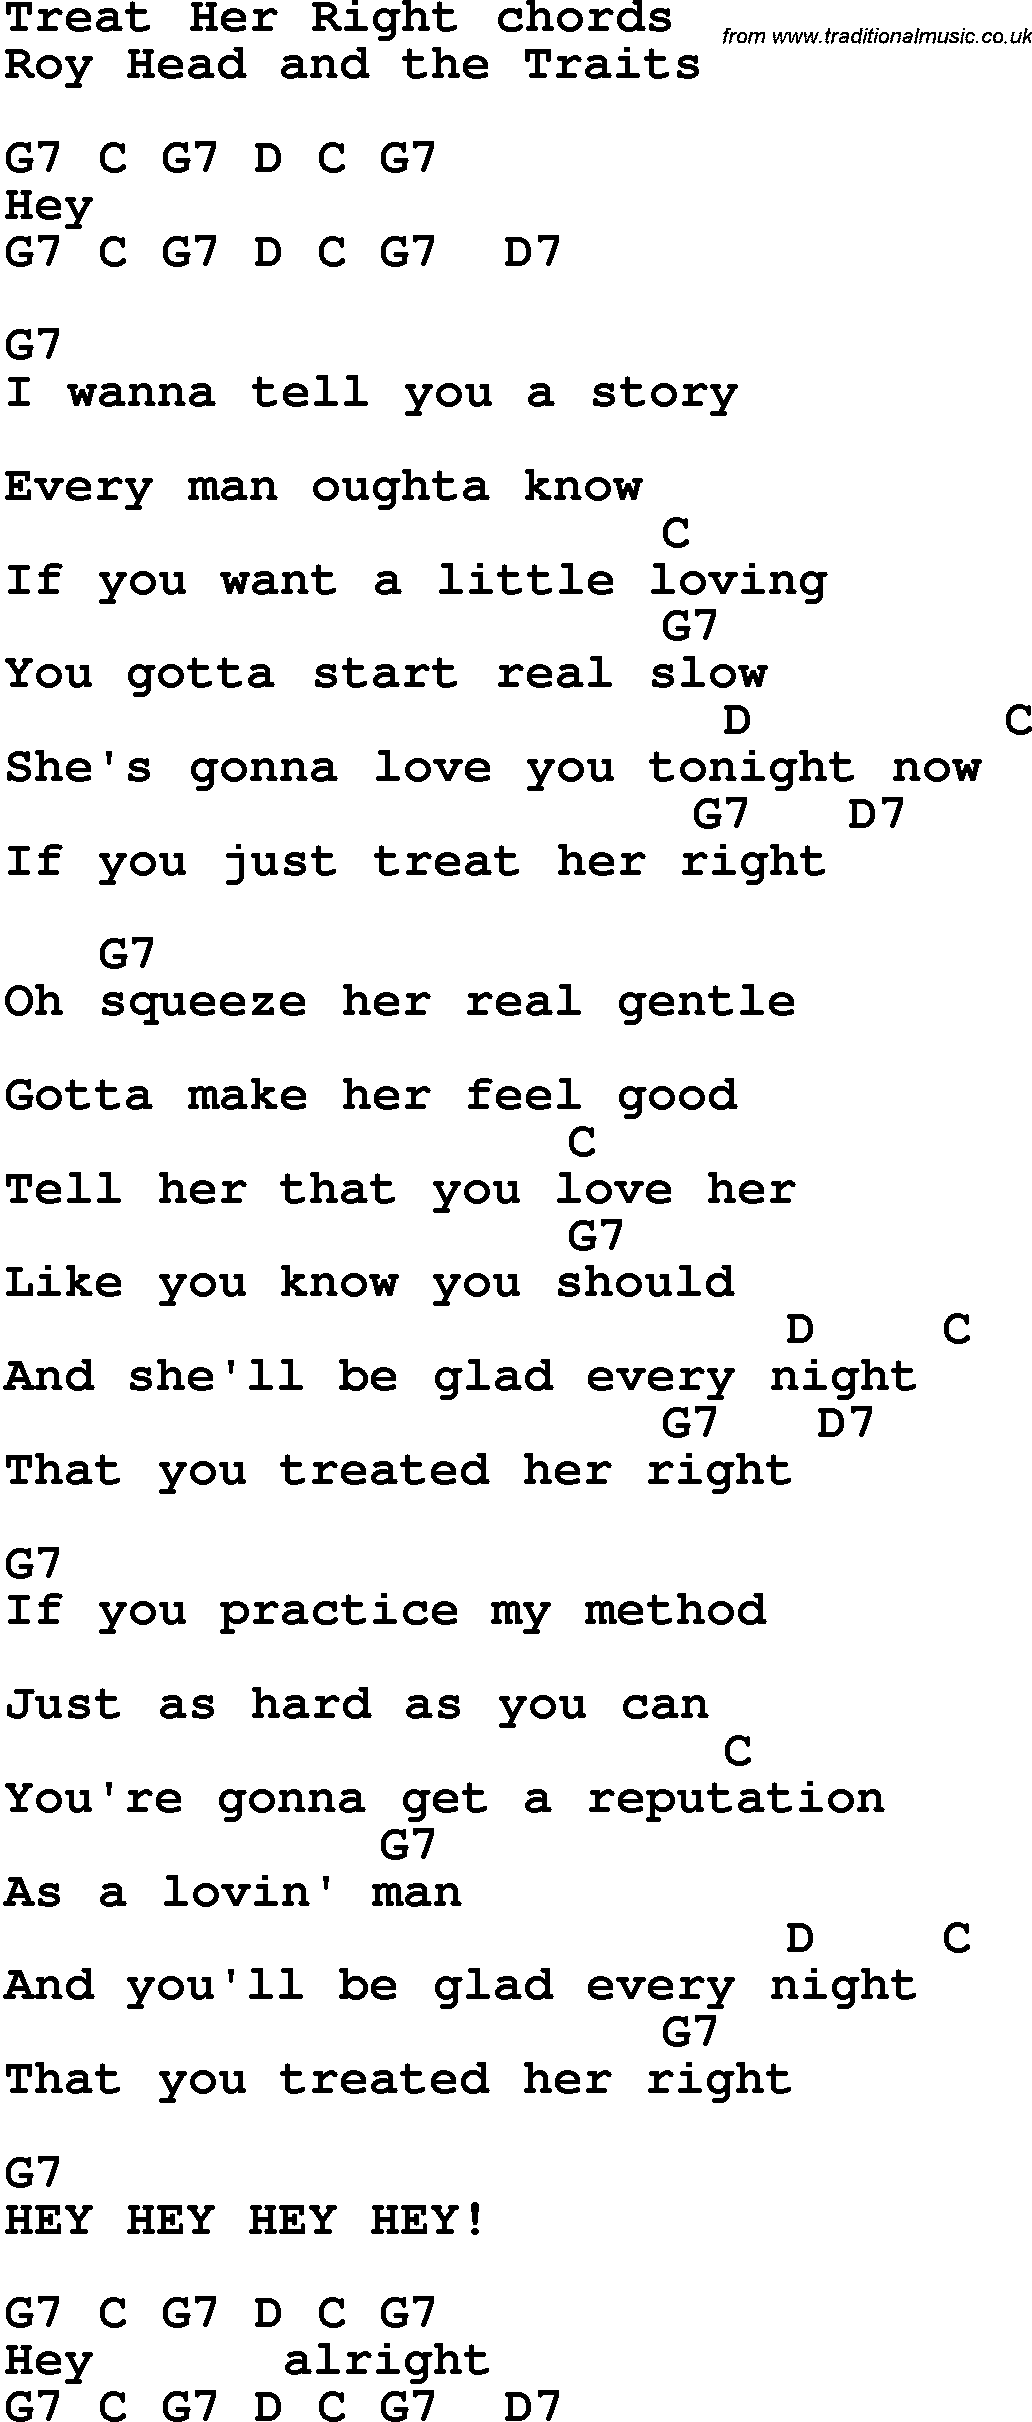 Song Lyrics with guitar chords for Treat Her Right